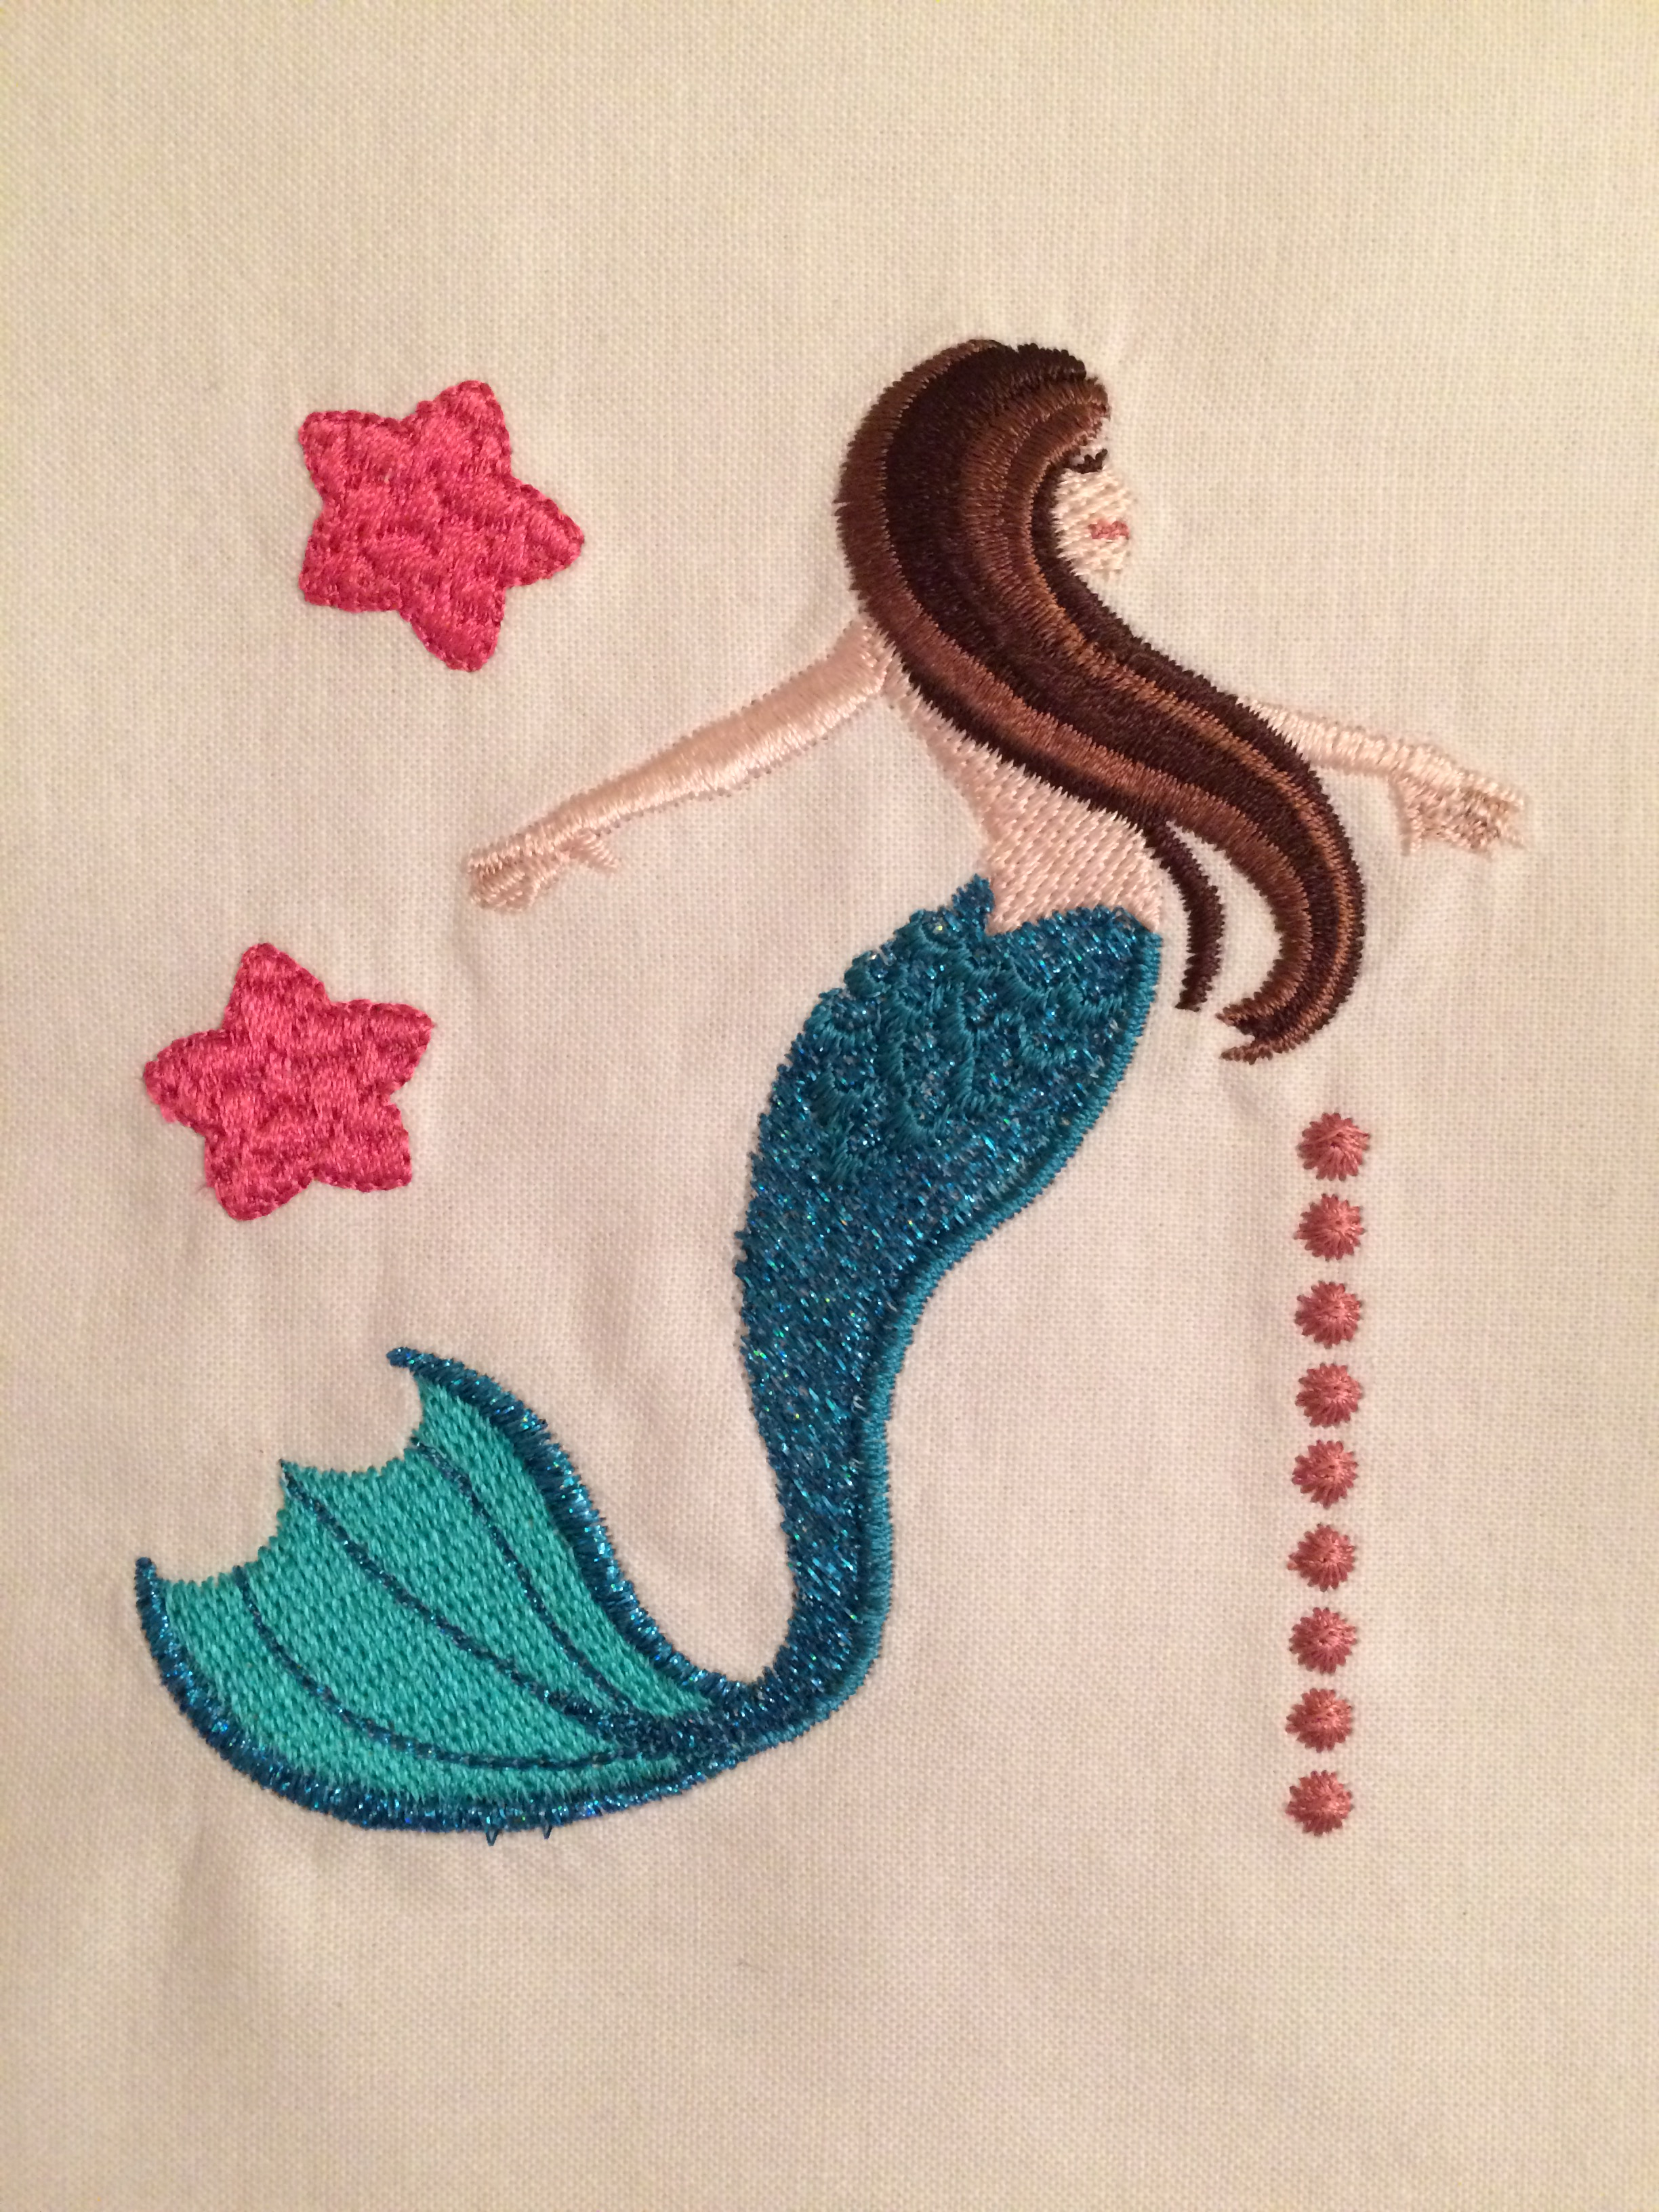 Liquid Embroidery Patterns Free Embroidery Designs Cute Embroidery Designs